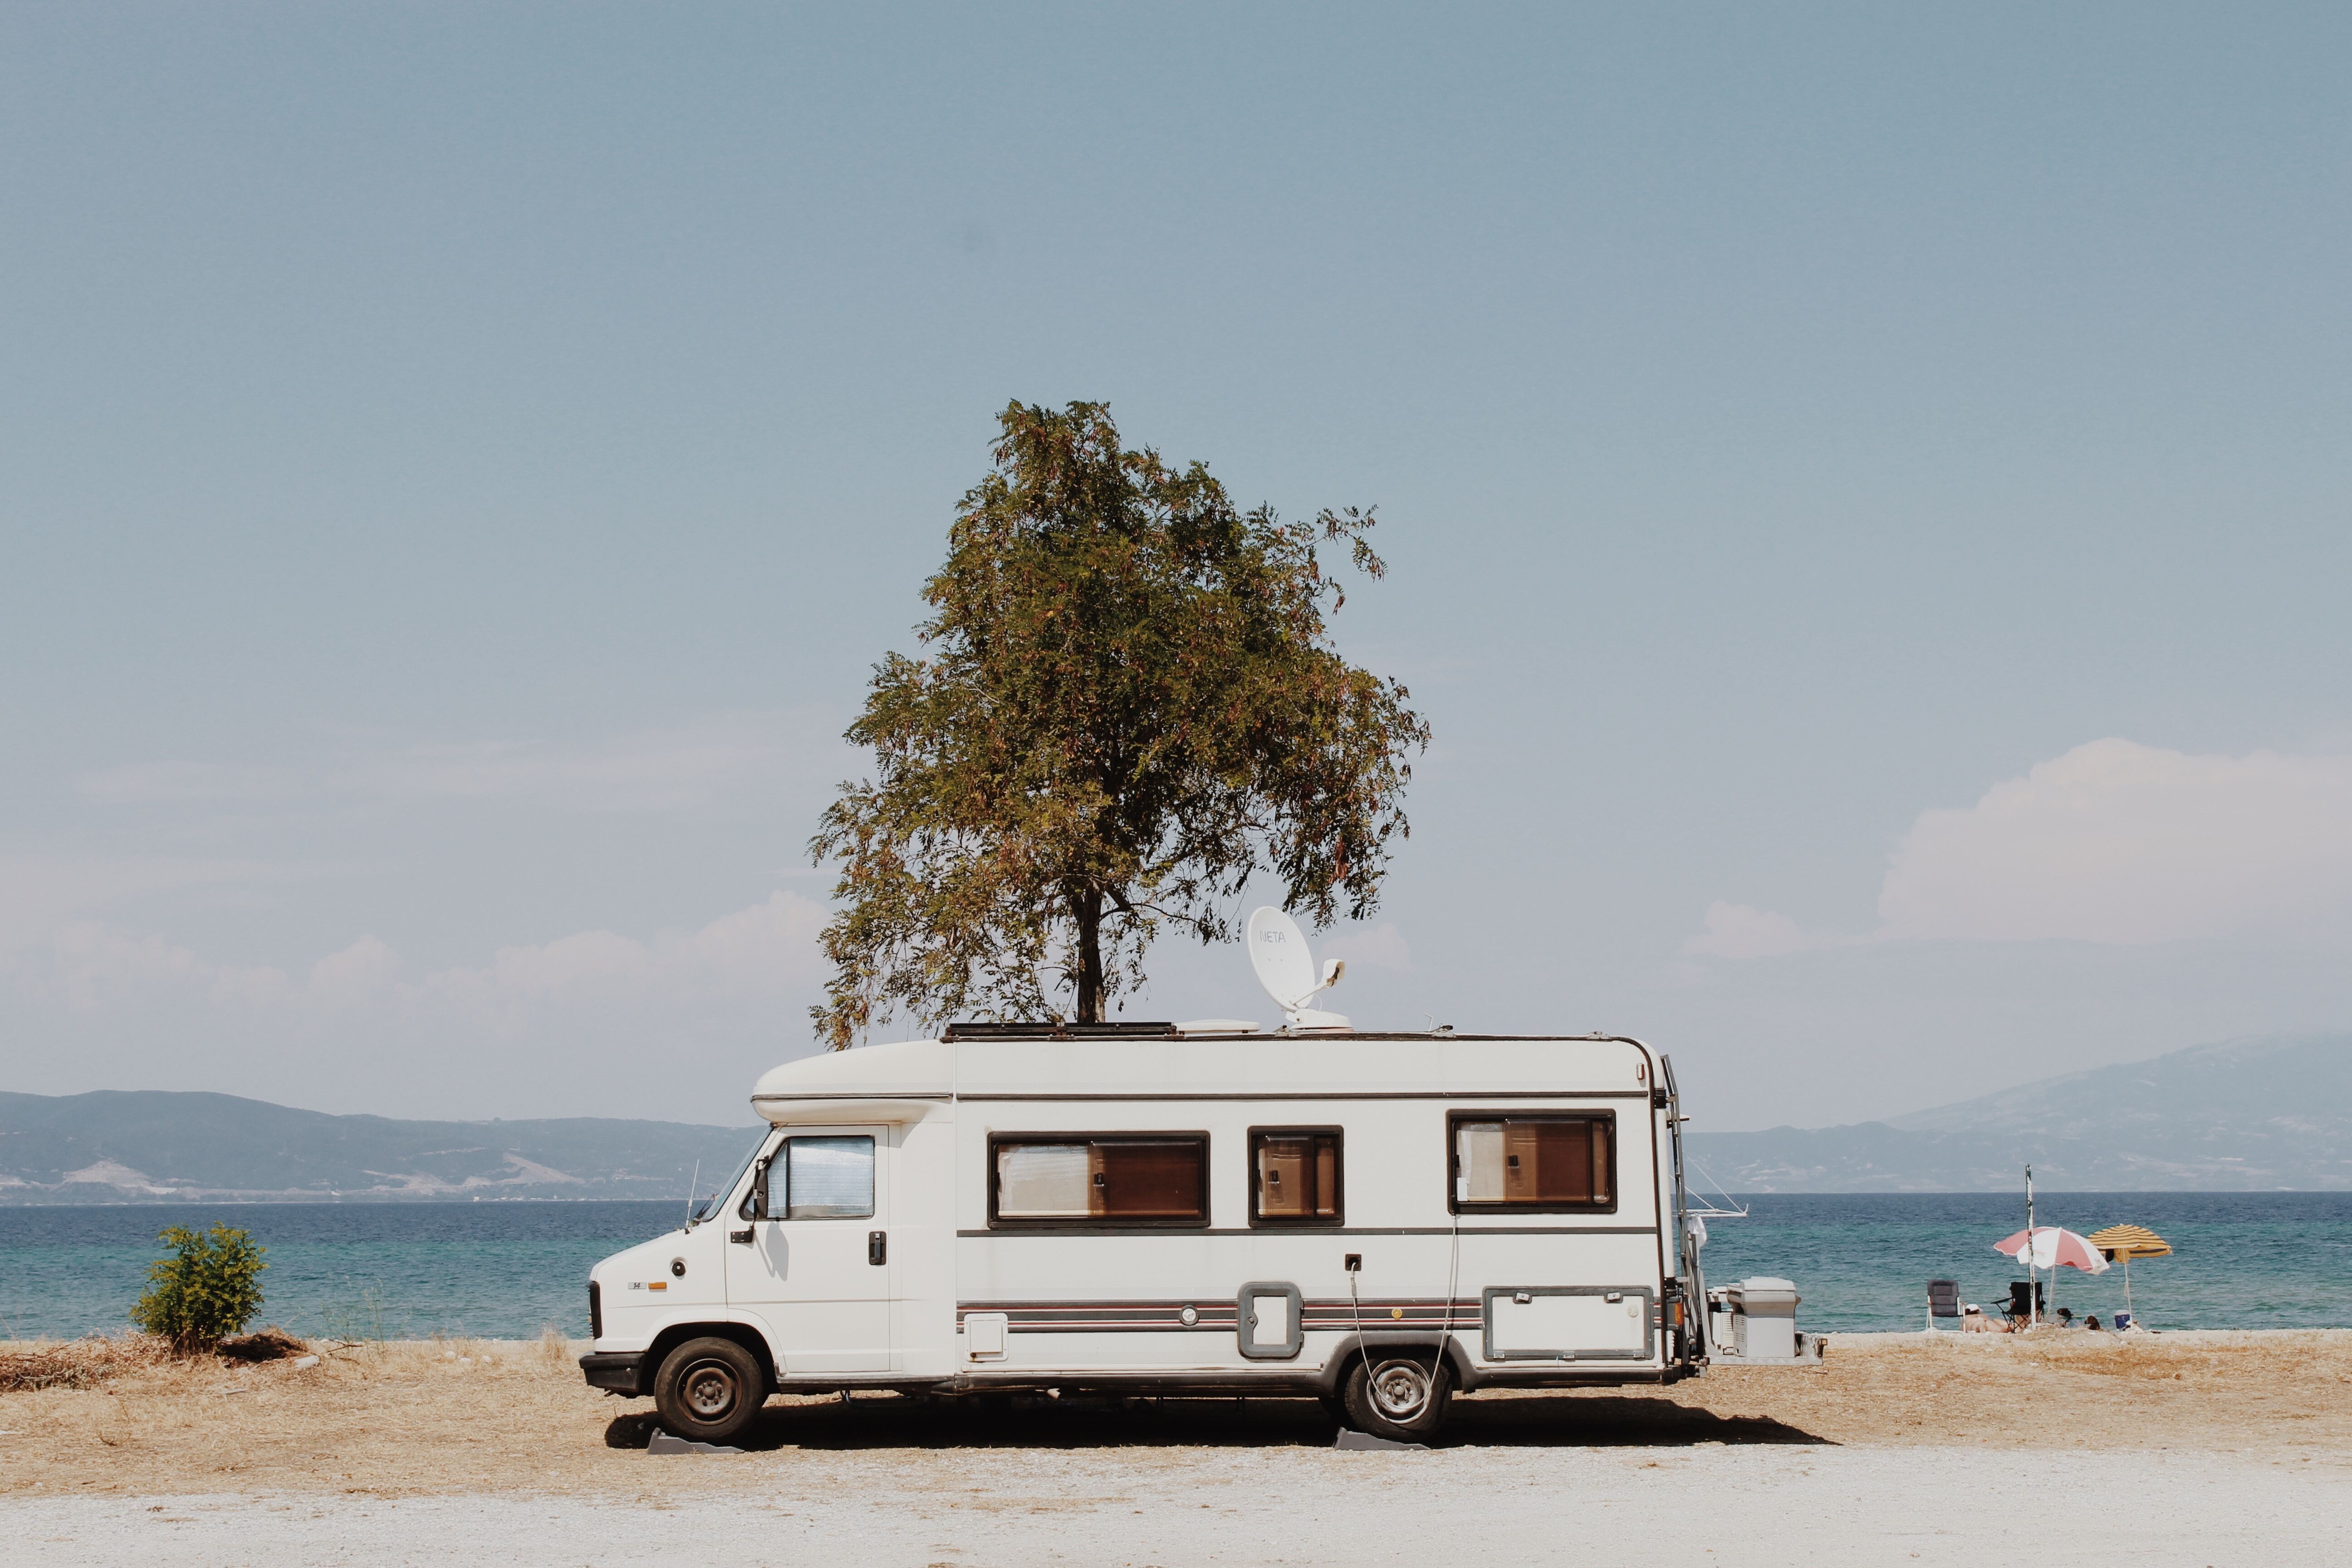 On holiday with the mobile home: what should you think about?
